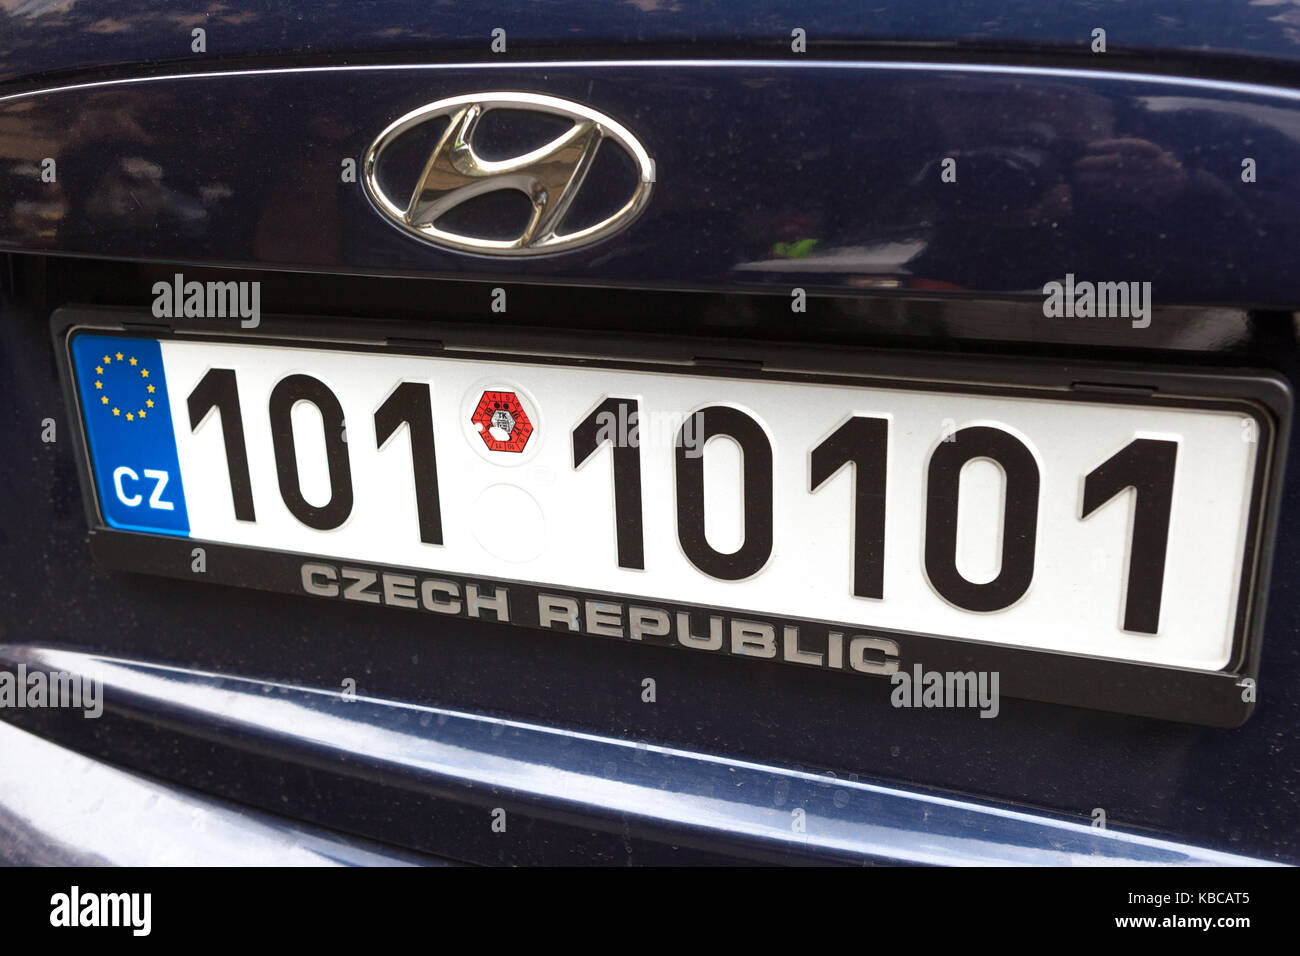 Unusually car number license plate car, declared in the Czech Republic Stock Photo